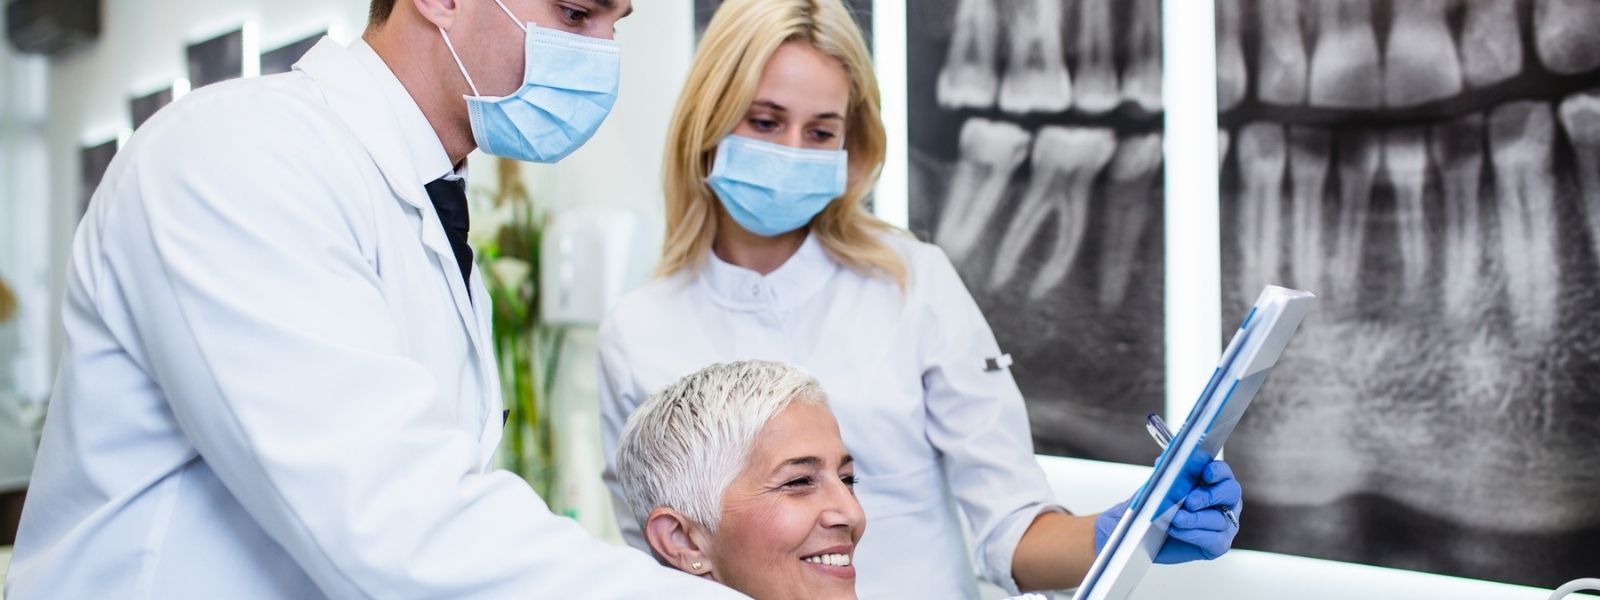 dentists consulting a patient